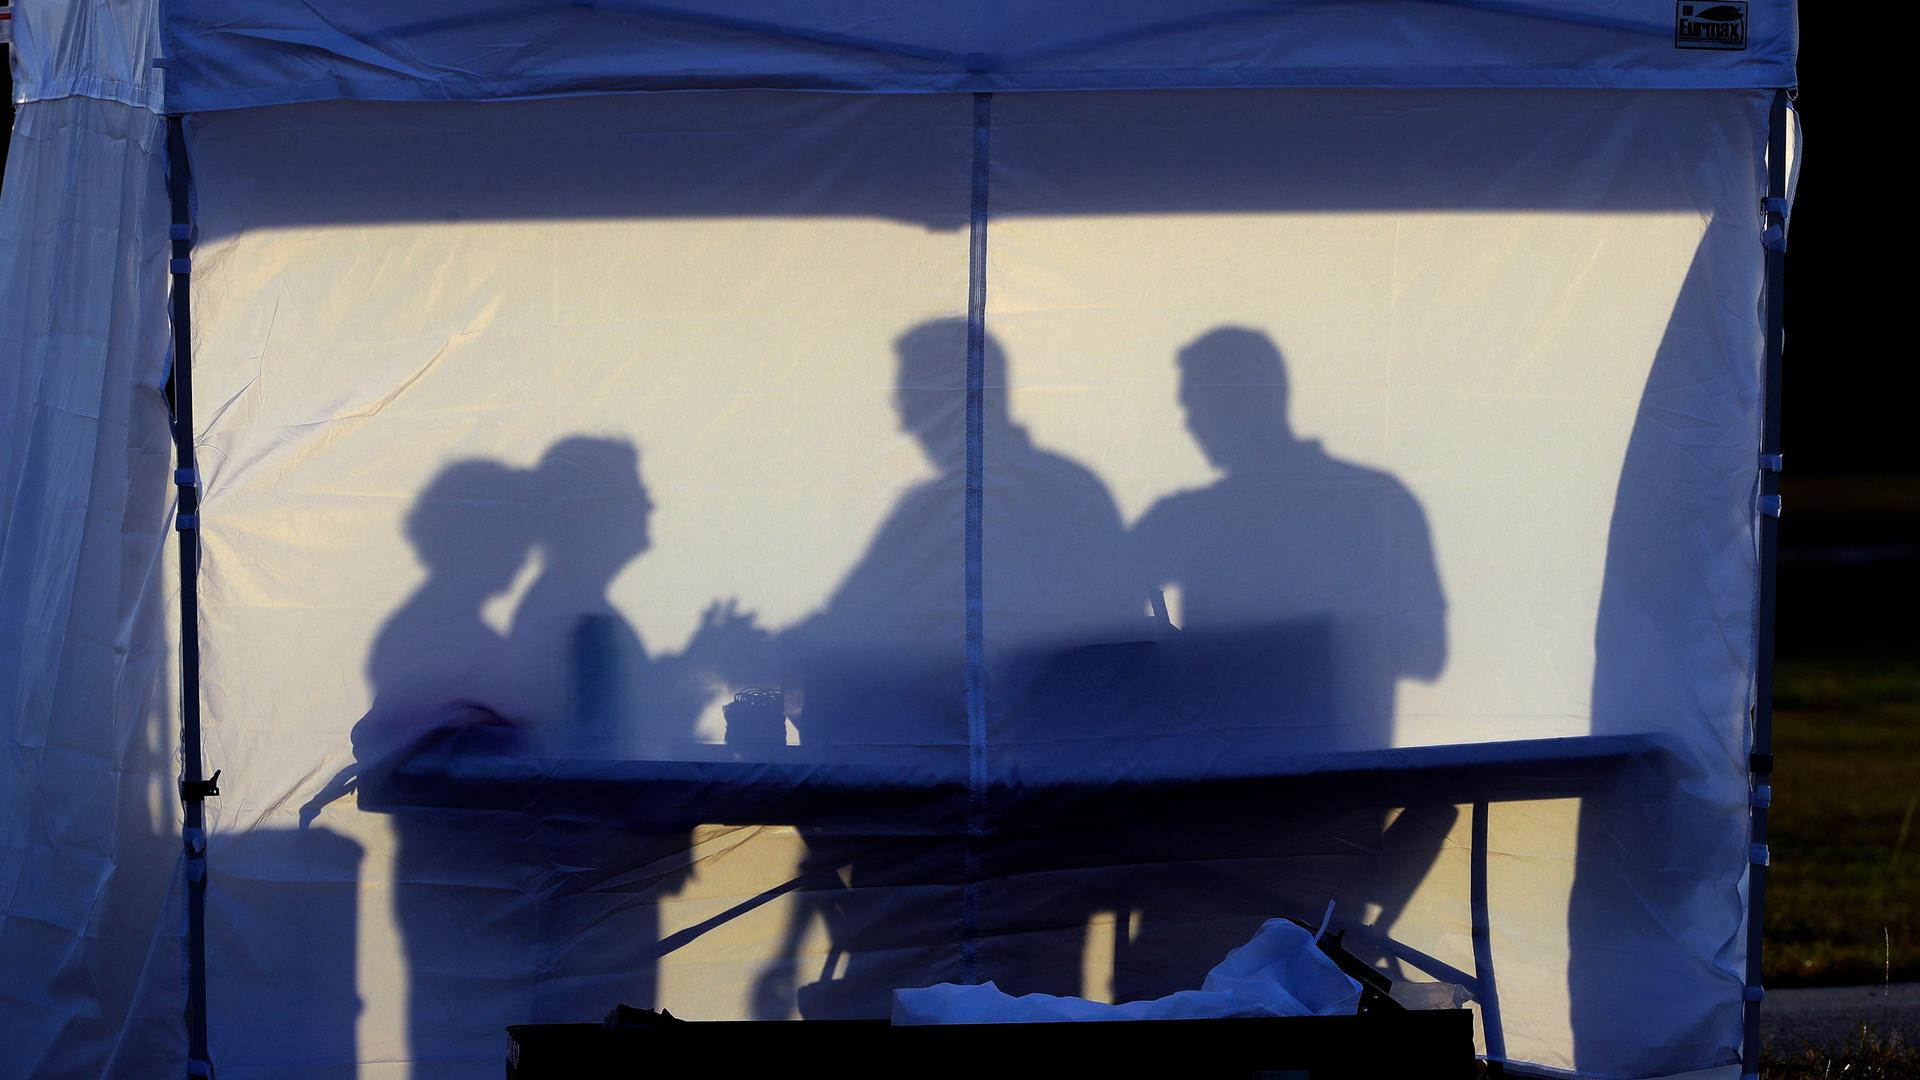 The silhouette of four people are show against the white panel of a tent.